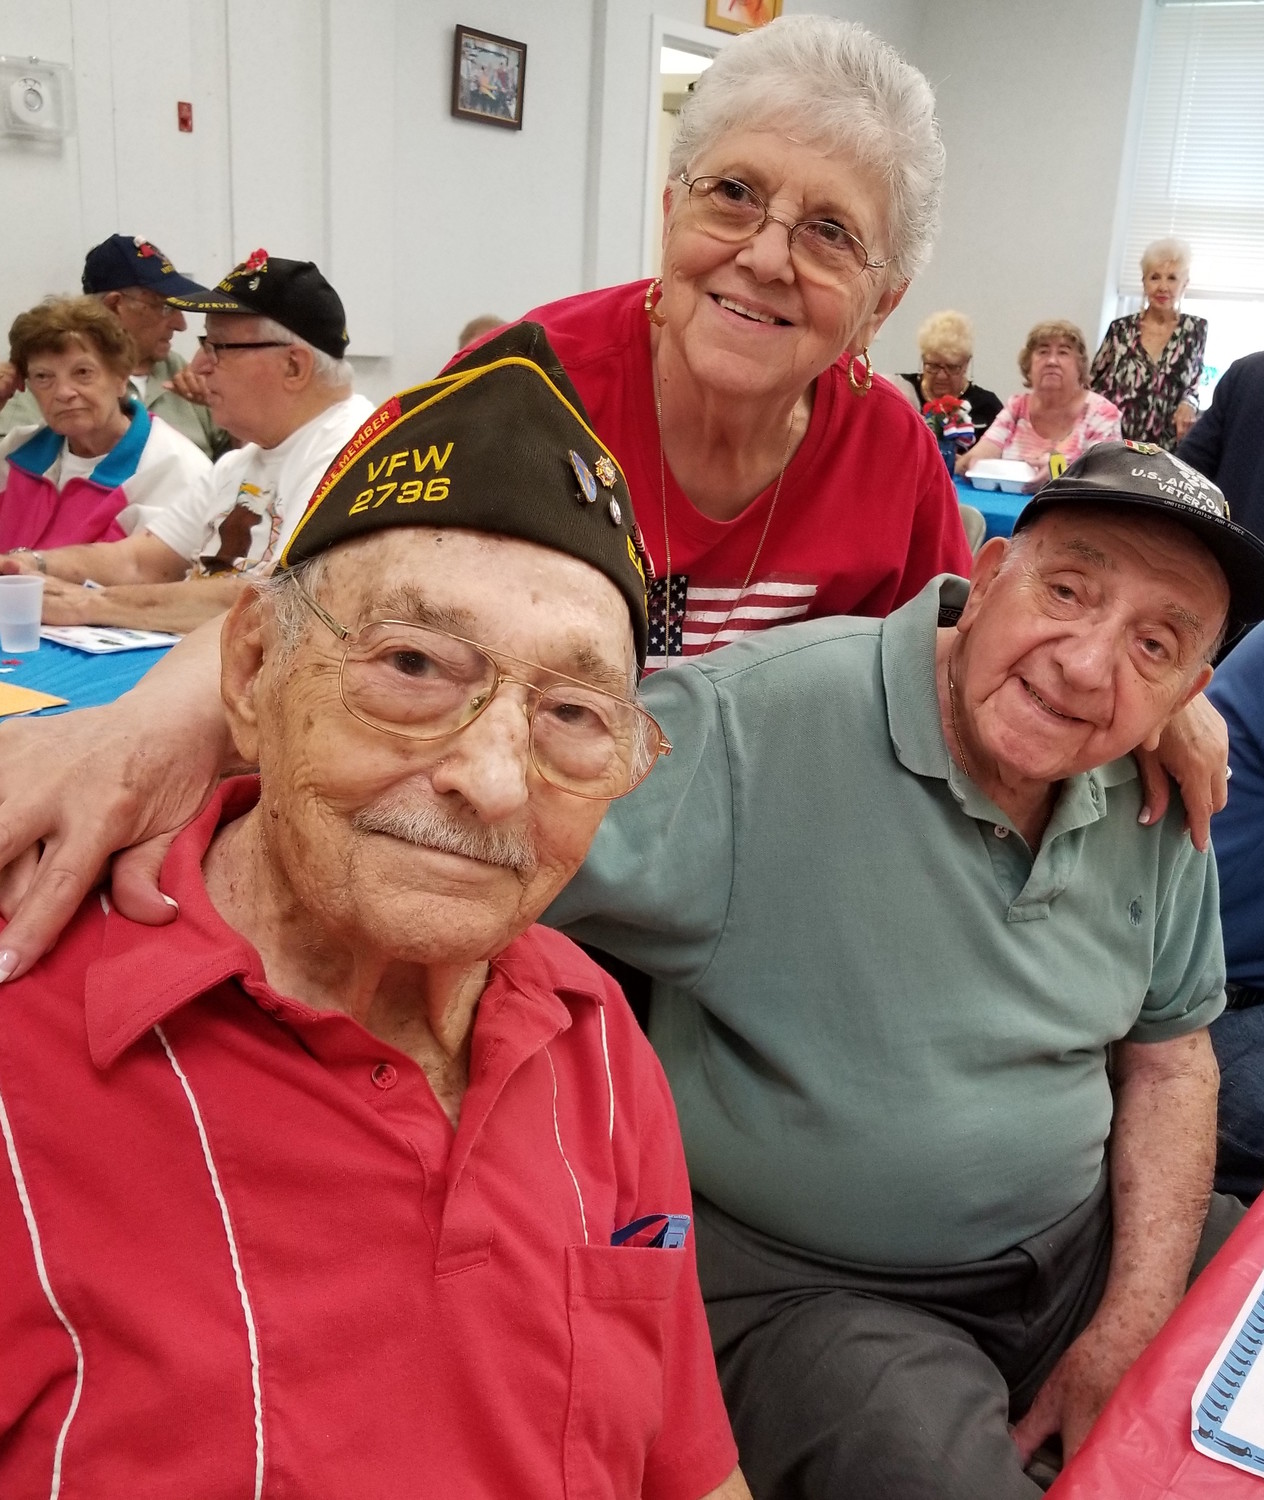 Alfonso Caggiano, far left, and his longtime friend Charlie Franza were honored by the Salisbury East Meadow Senior Center on Aug. 17. The event was organized by Caggiano’s wife, Phyllis, who is the center’s co-president.